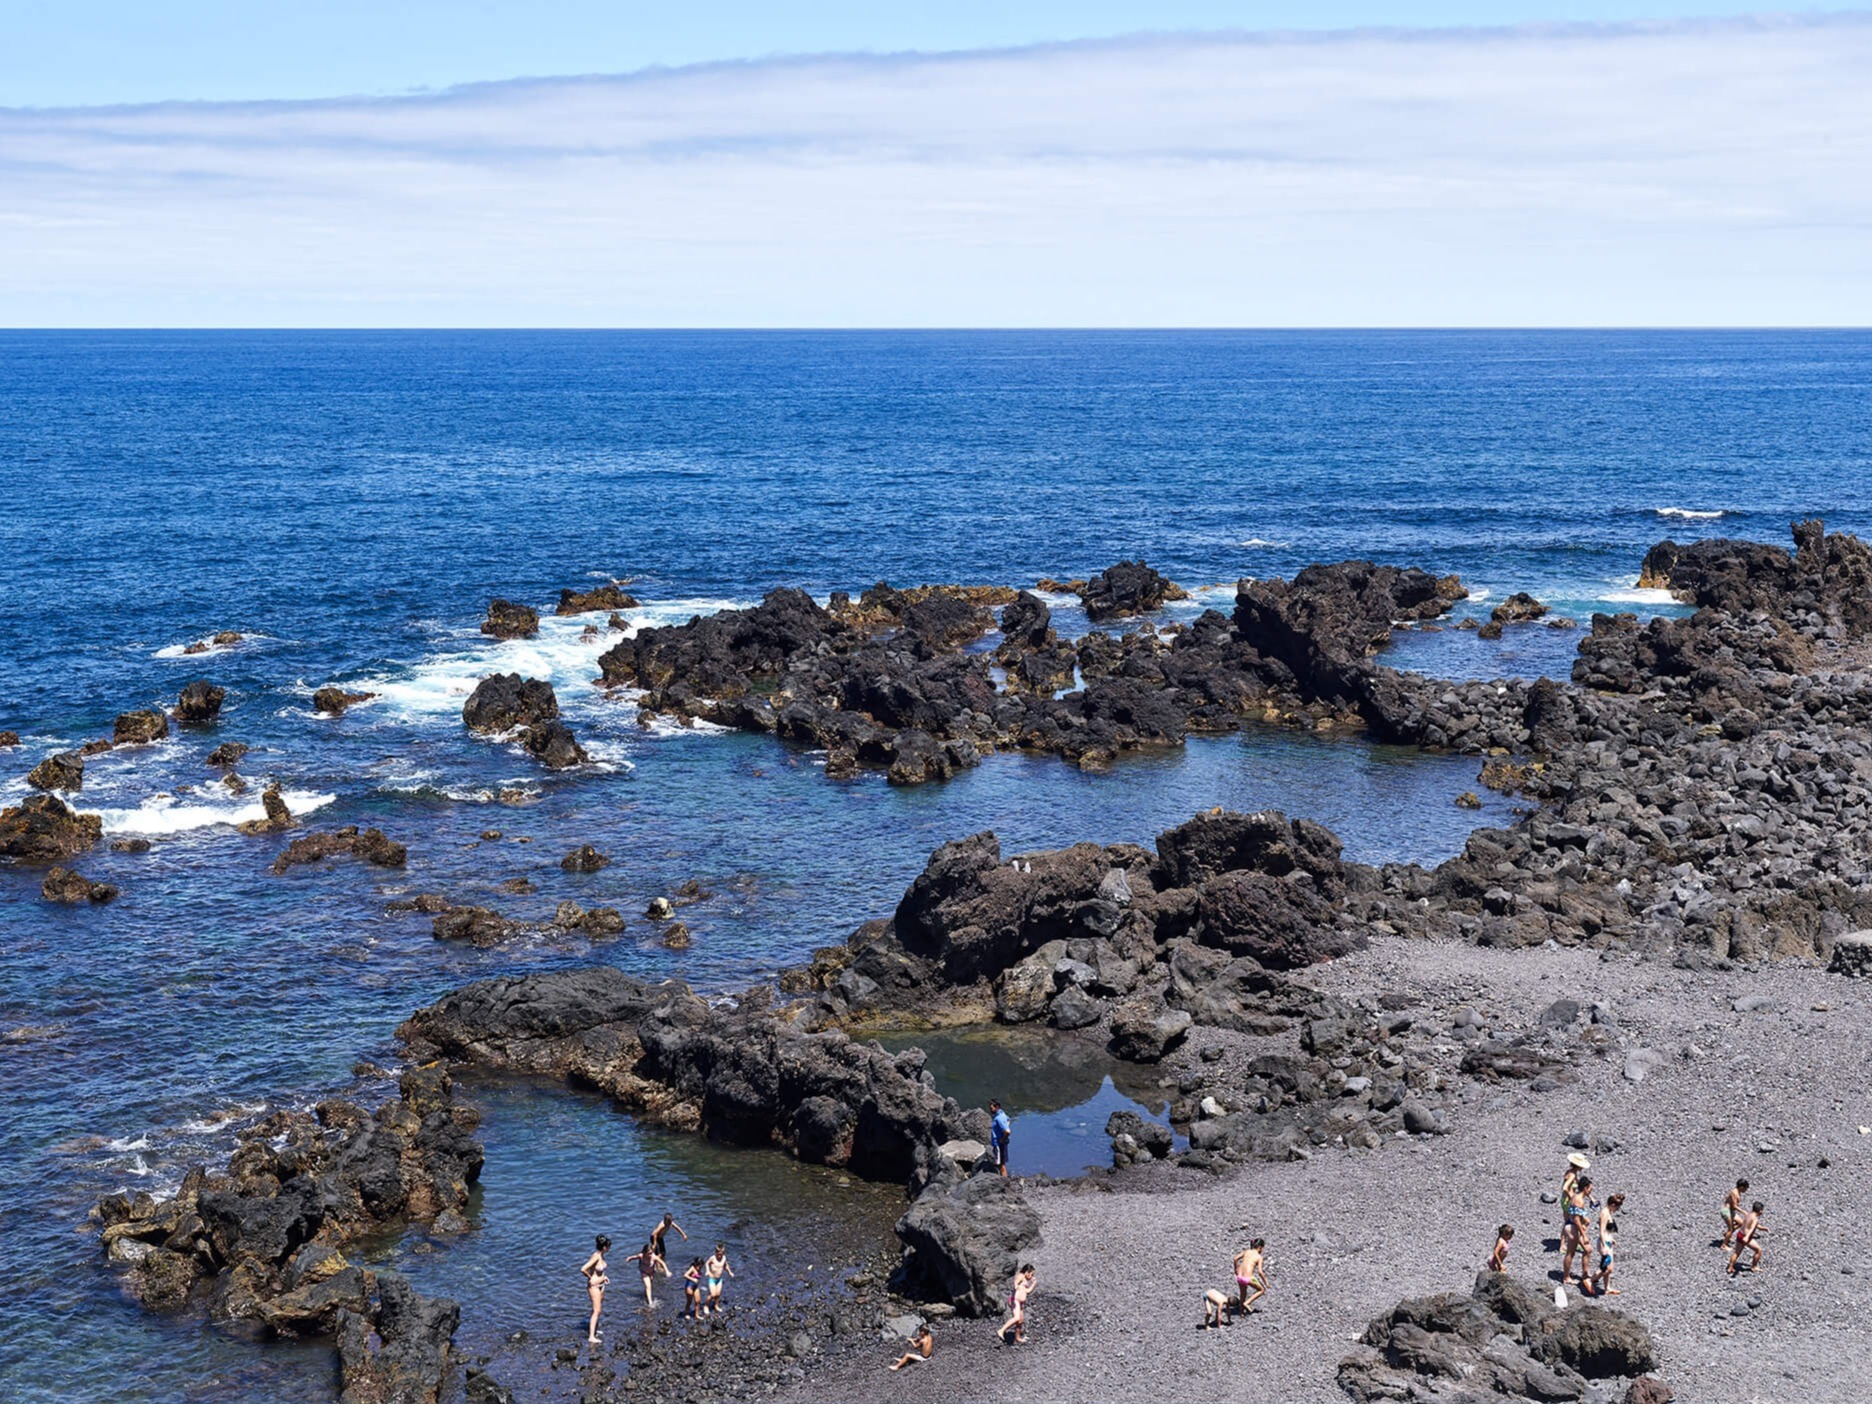 WePresent Massimo Vitali captures a typical day at the beach